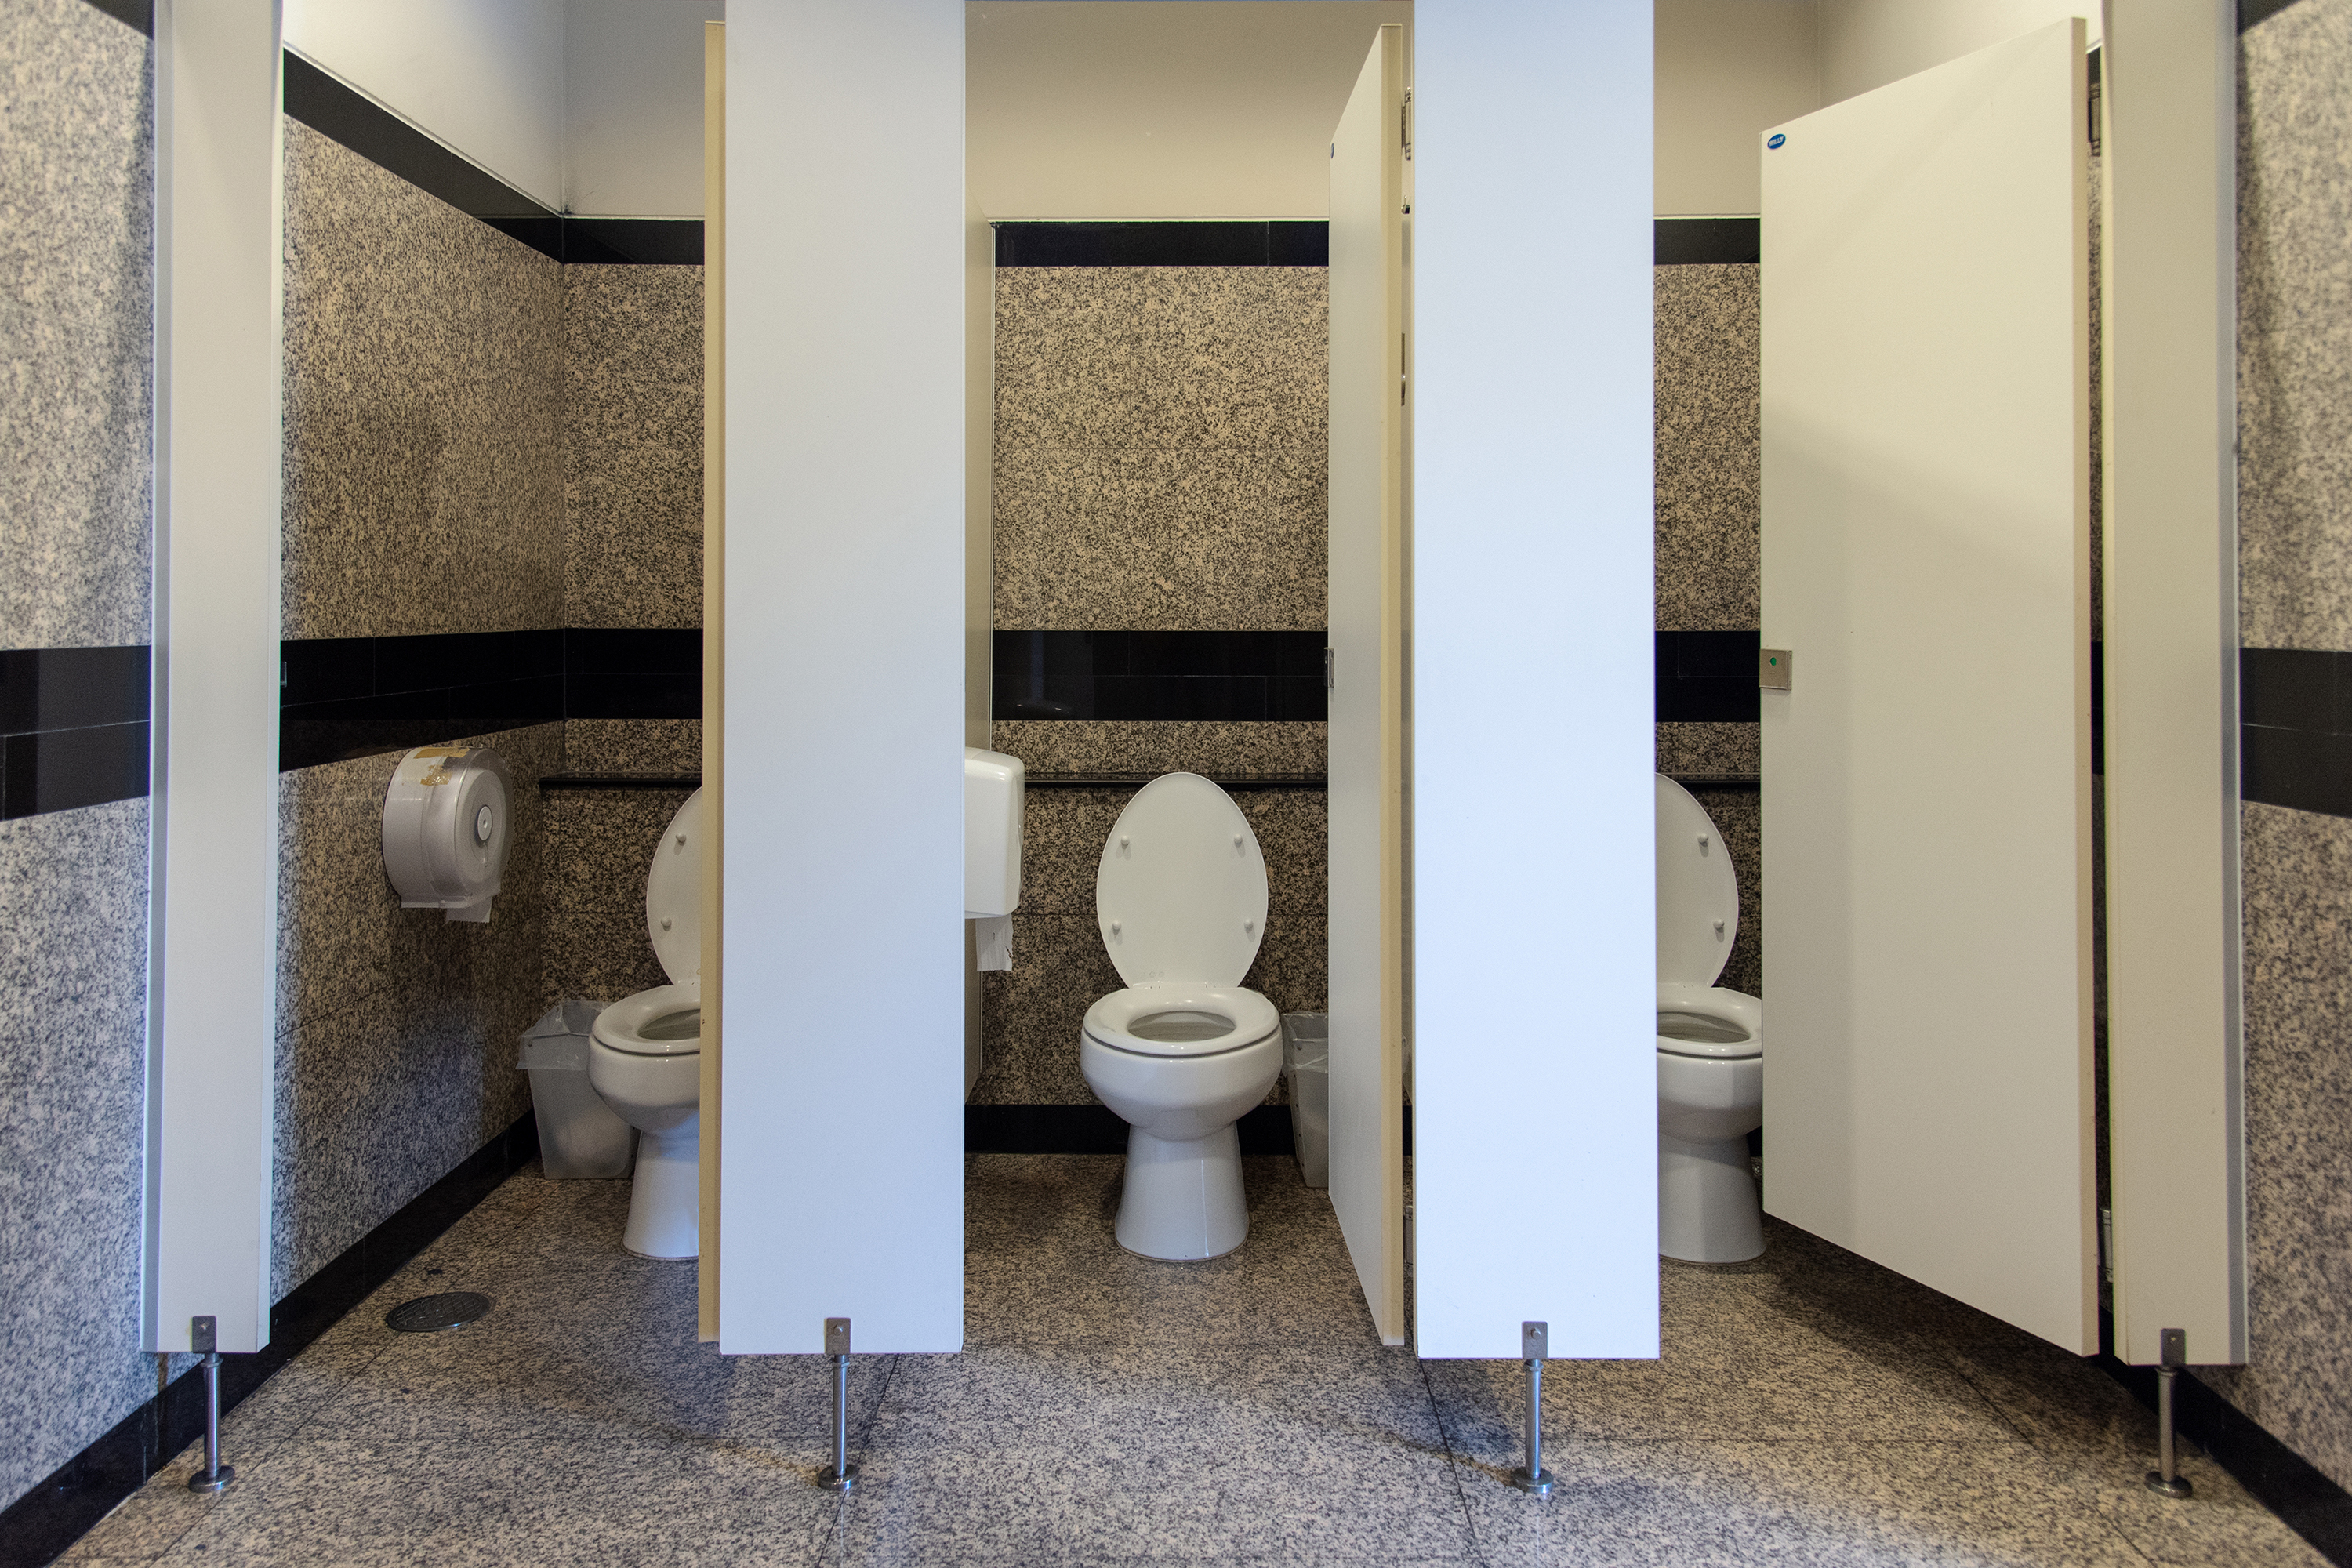 7 Toilet Positions To Relieve Constipation - Bladder & Bowel Community